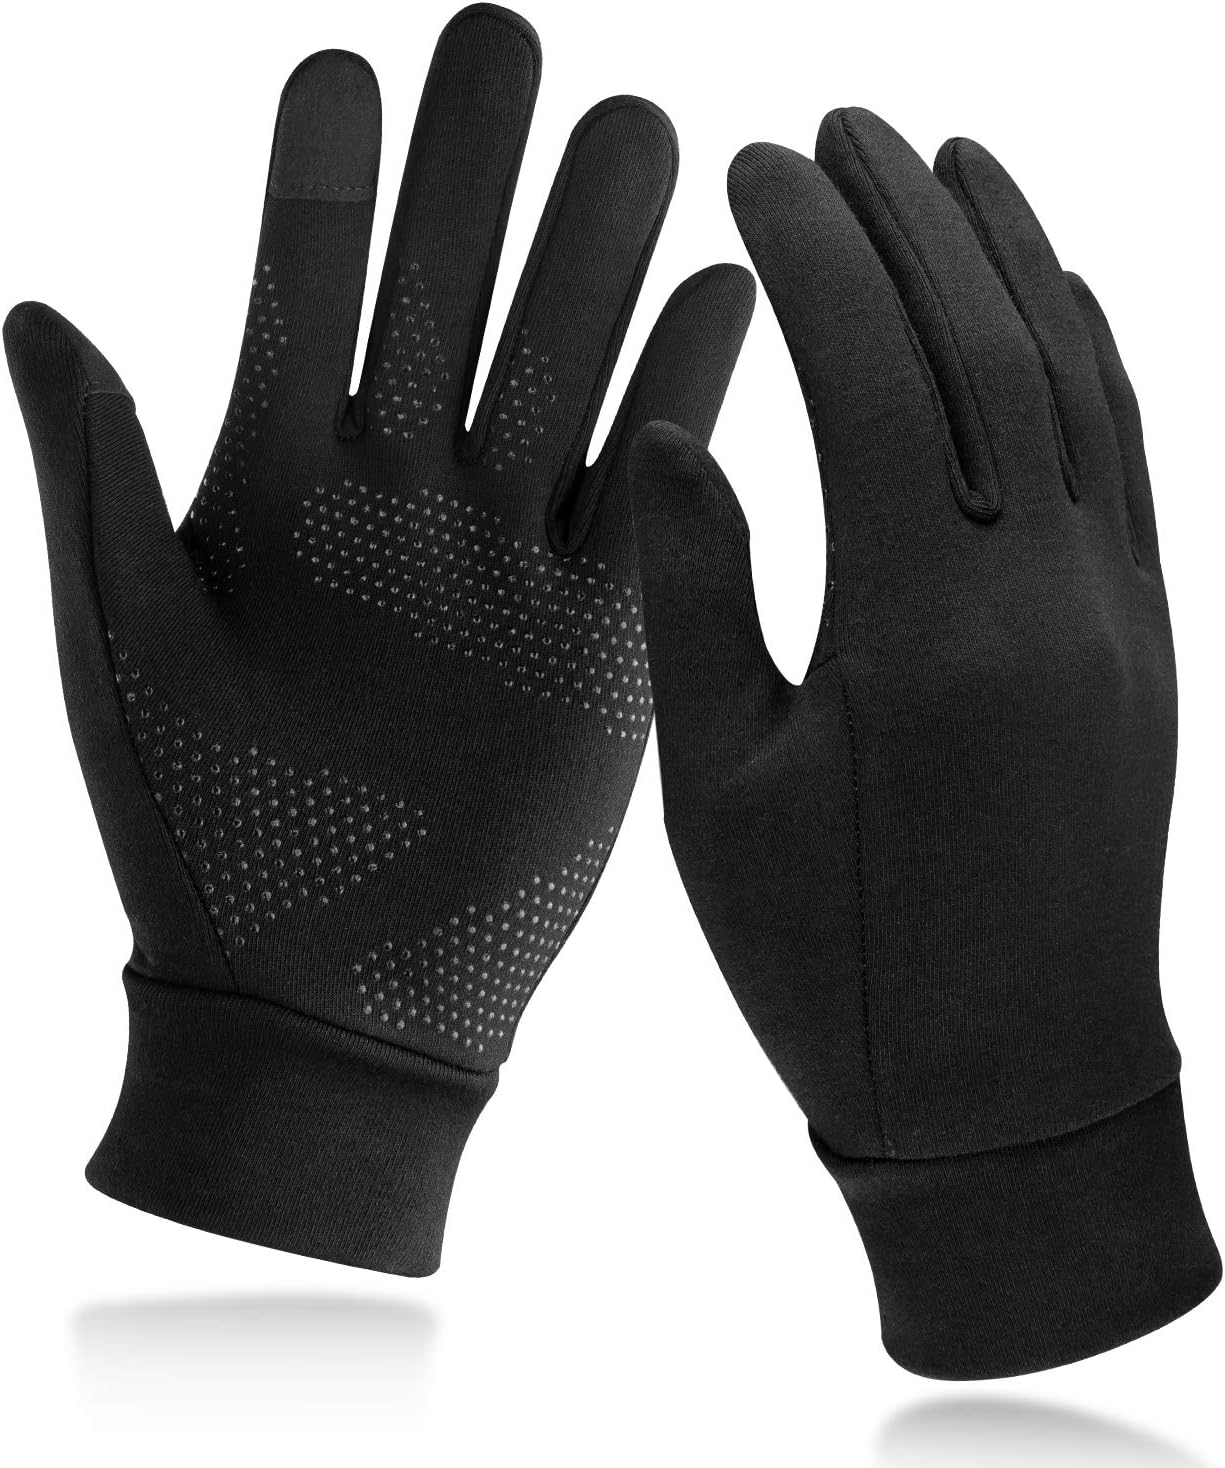 smartphone gloves christmas gifts for a female boss who has everything